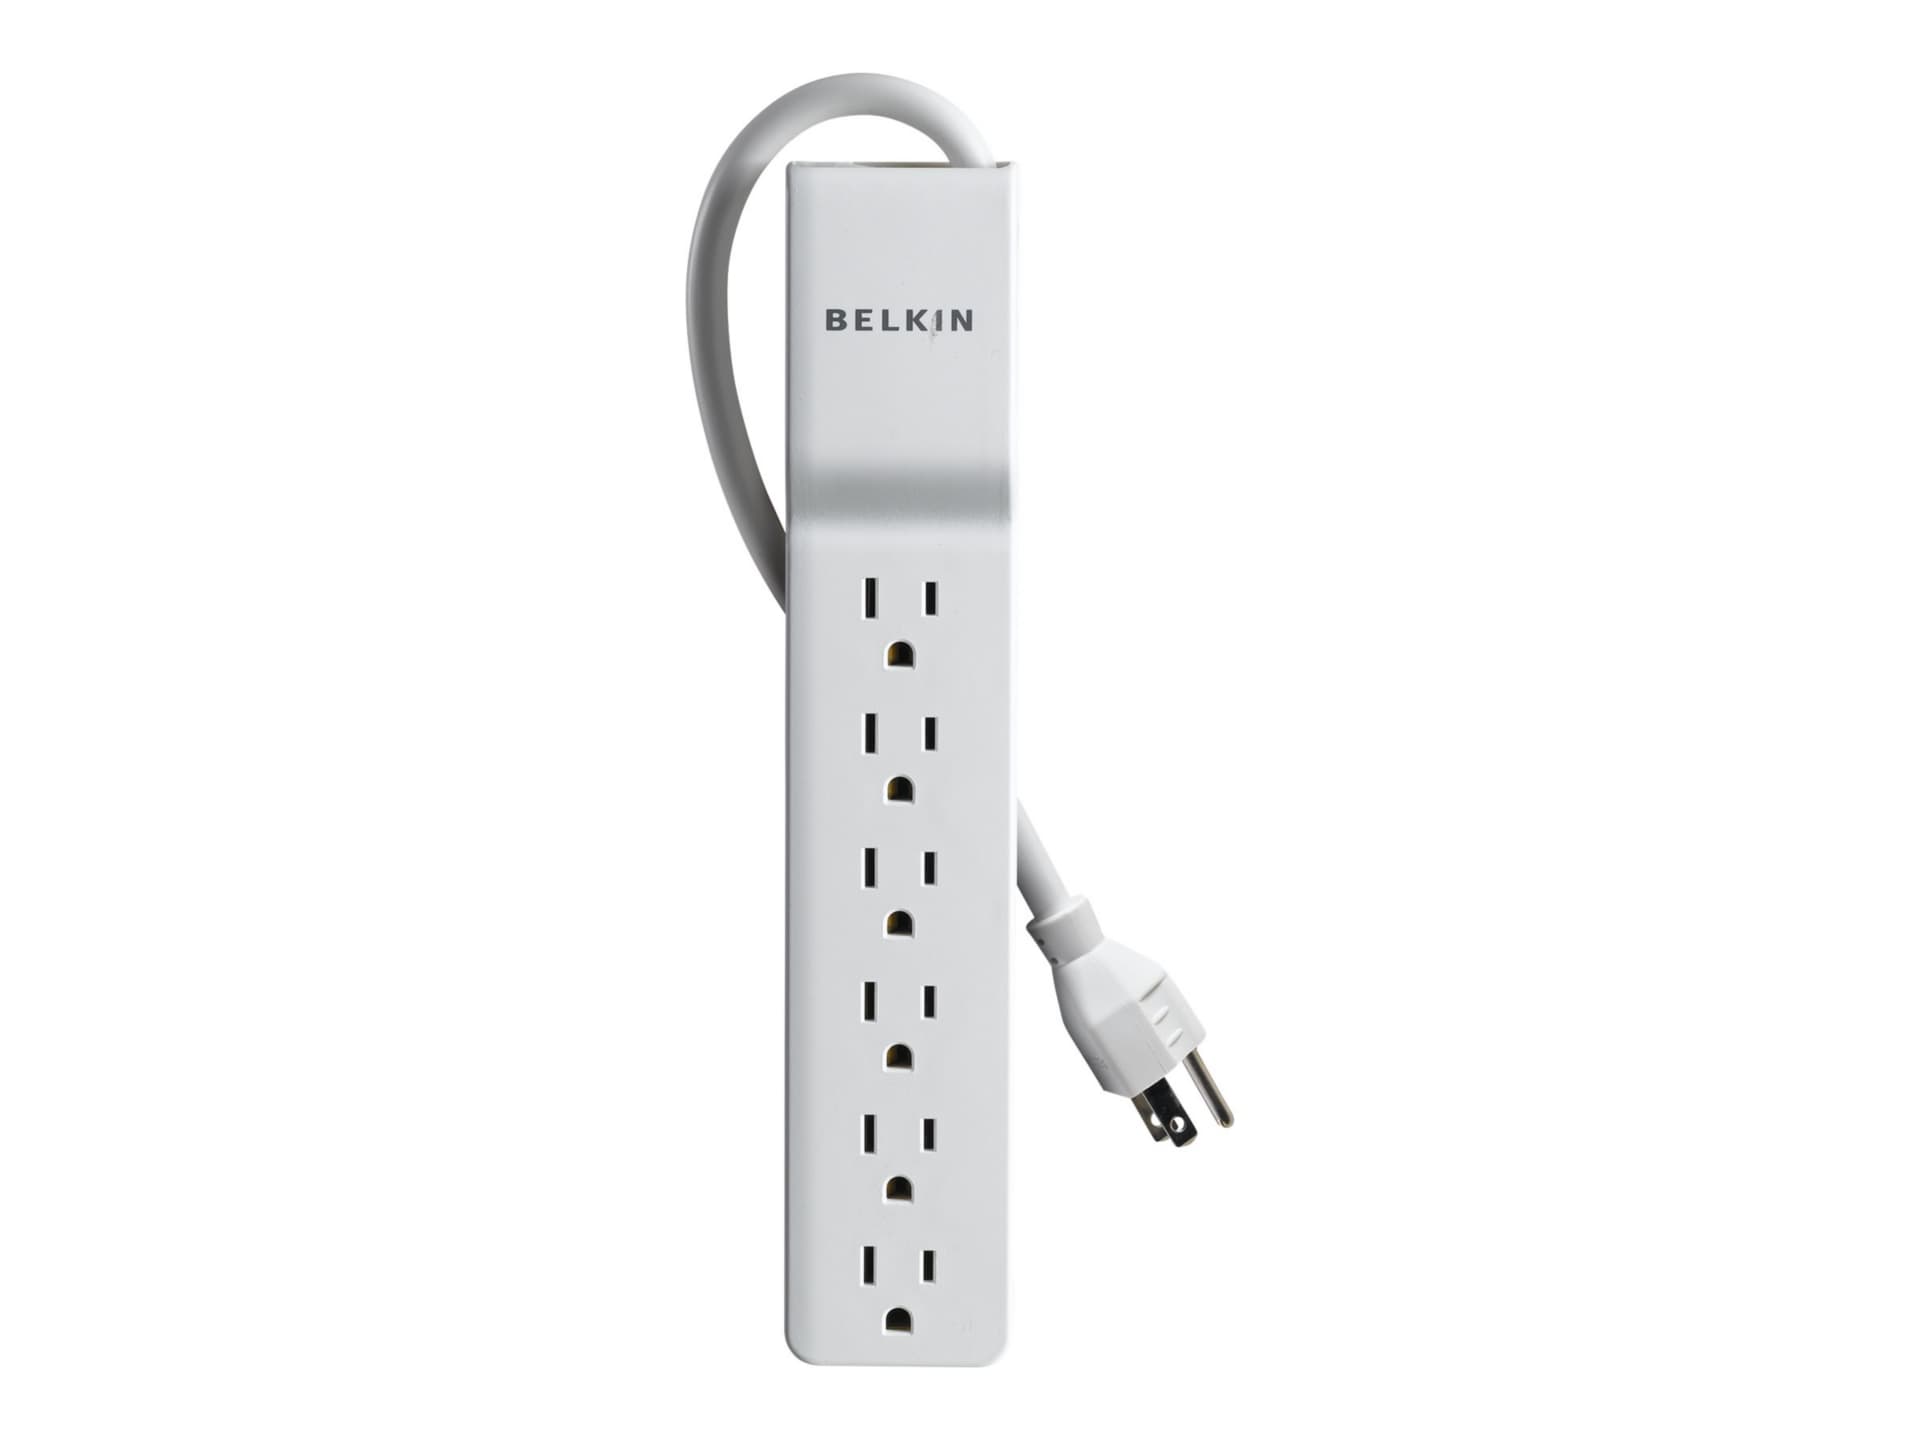 Belkin 6-Outlet Home & Office Power Strip Surge Protector - 4ft Cord -White